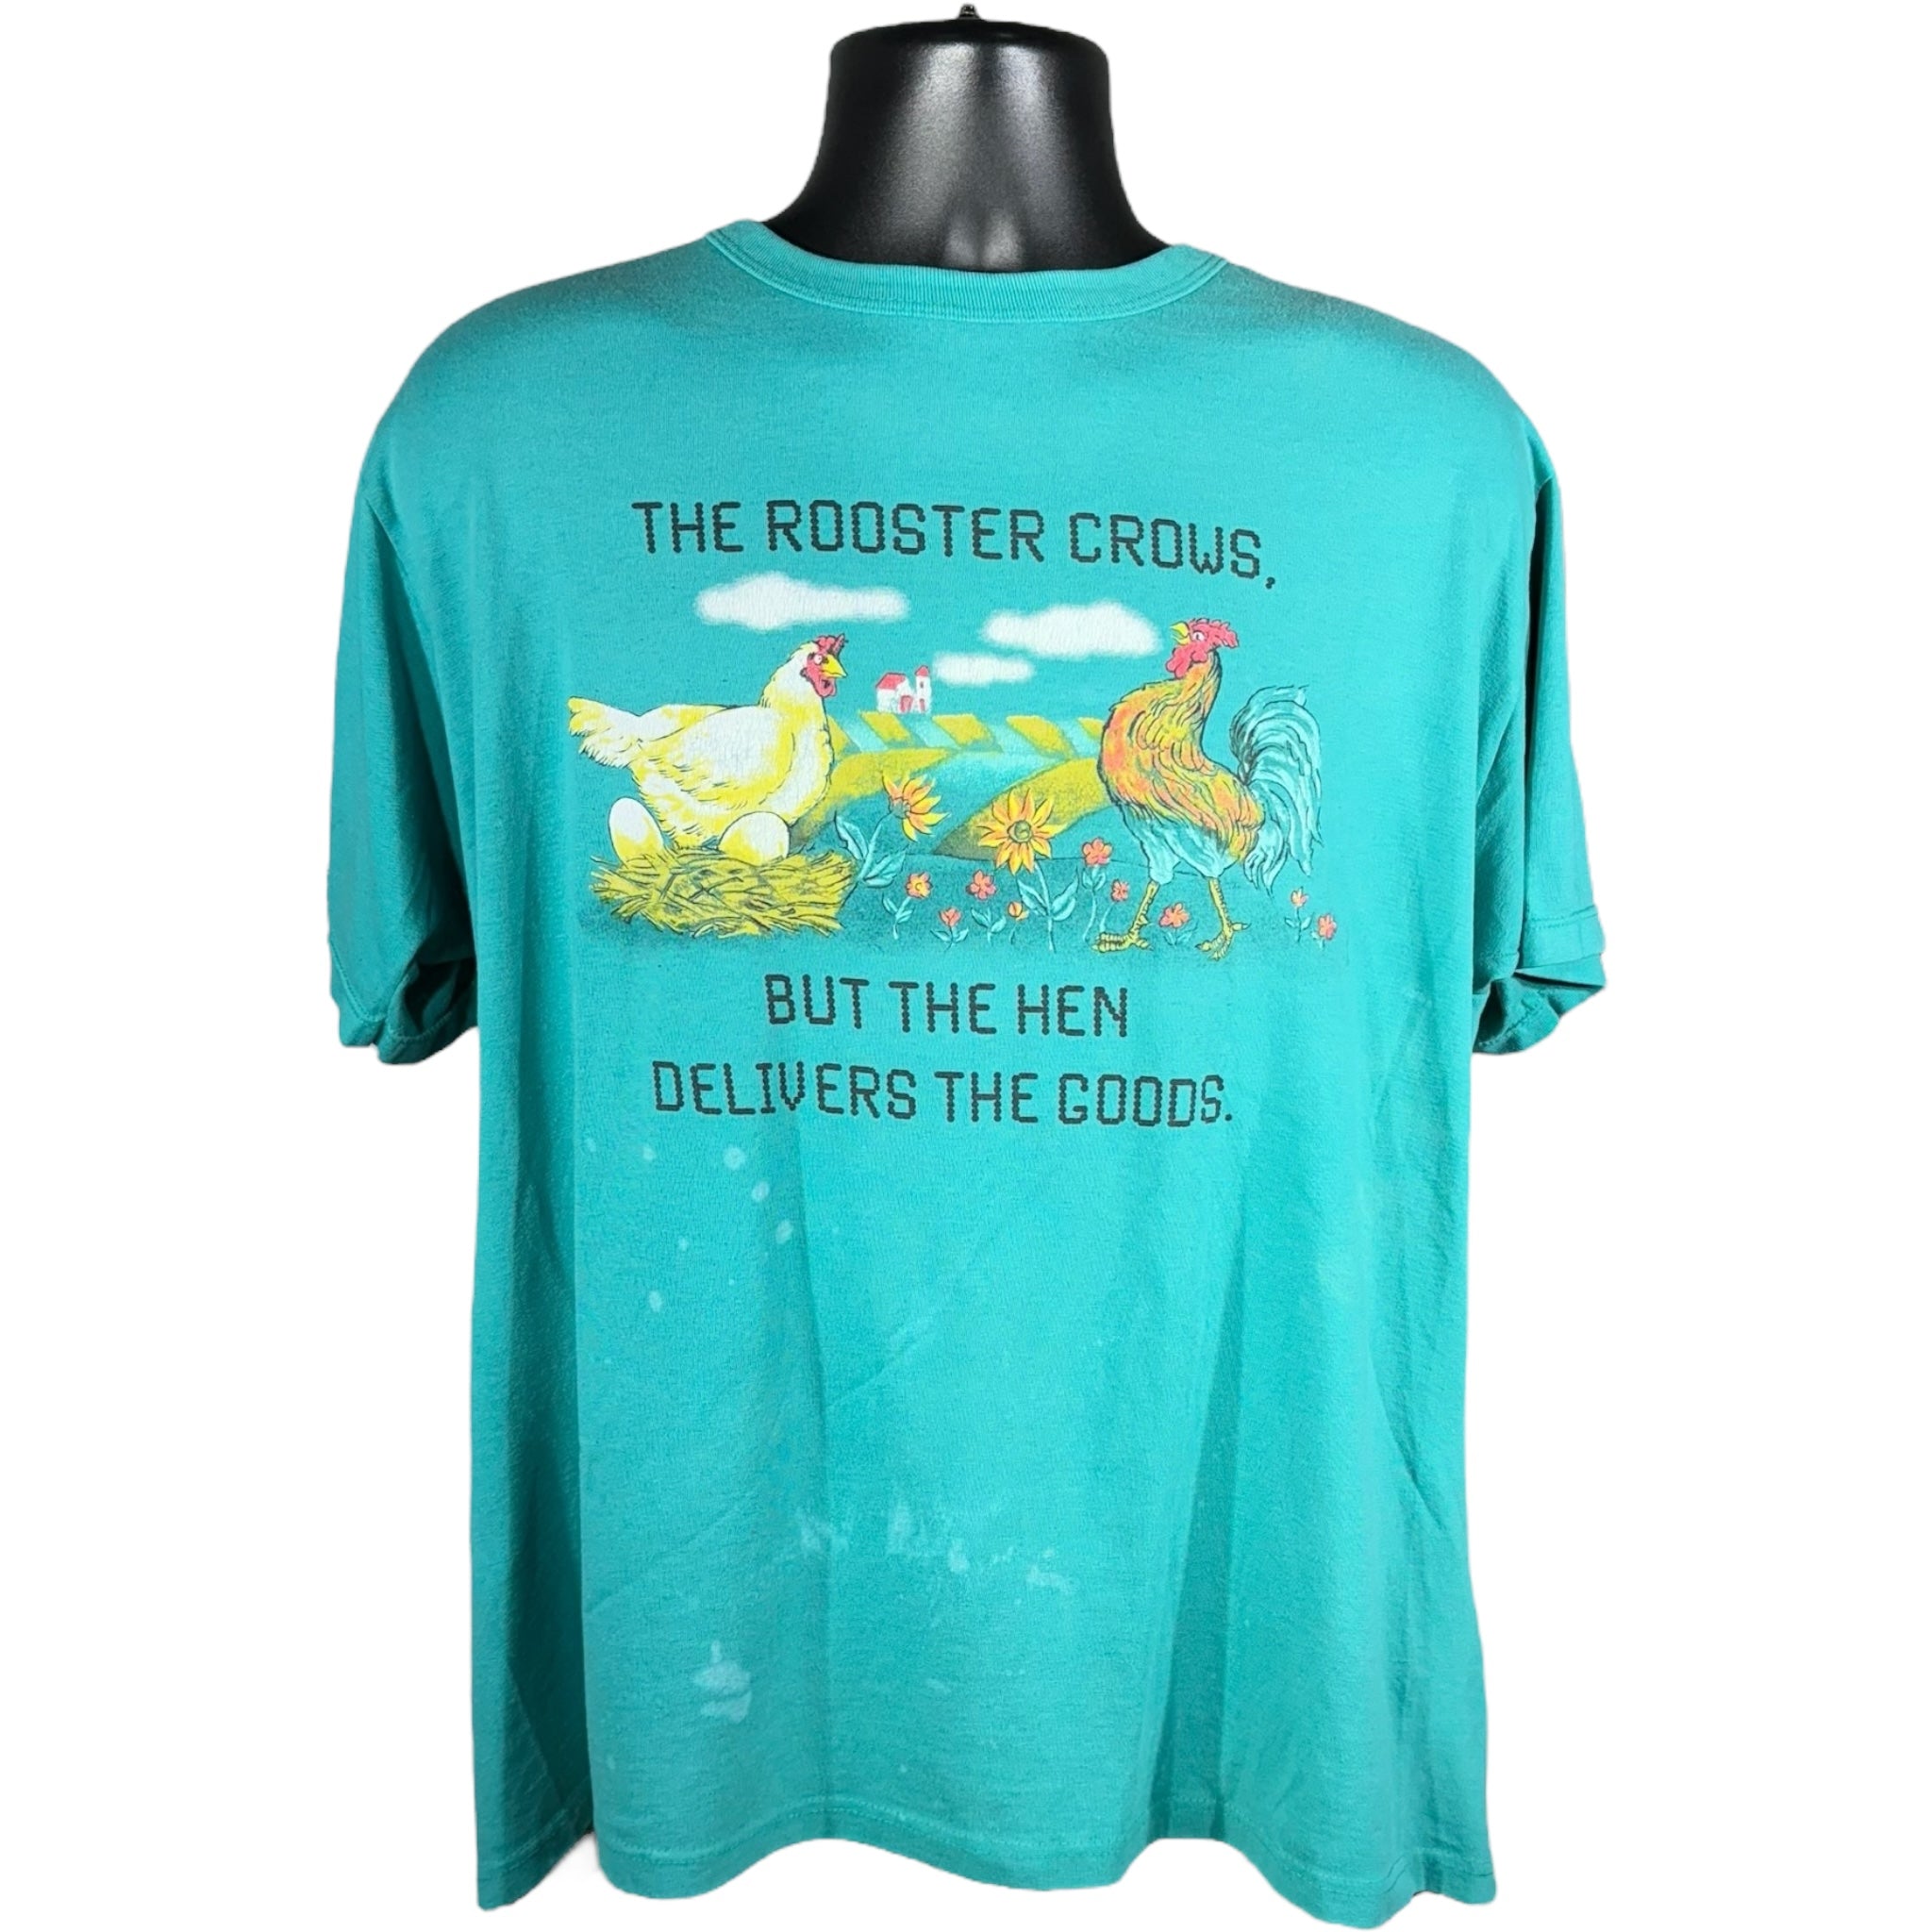 Vintage "The Rooster Crows, But The Hen Delivers The Goods." Tee 90s